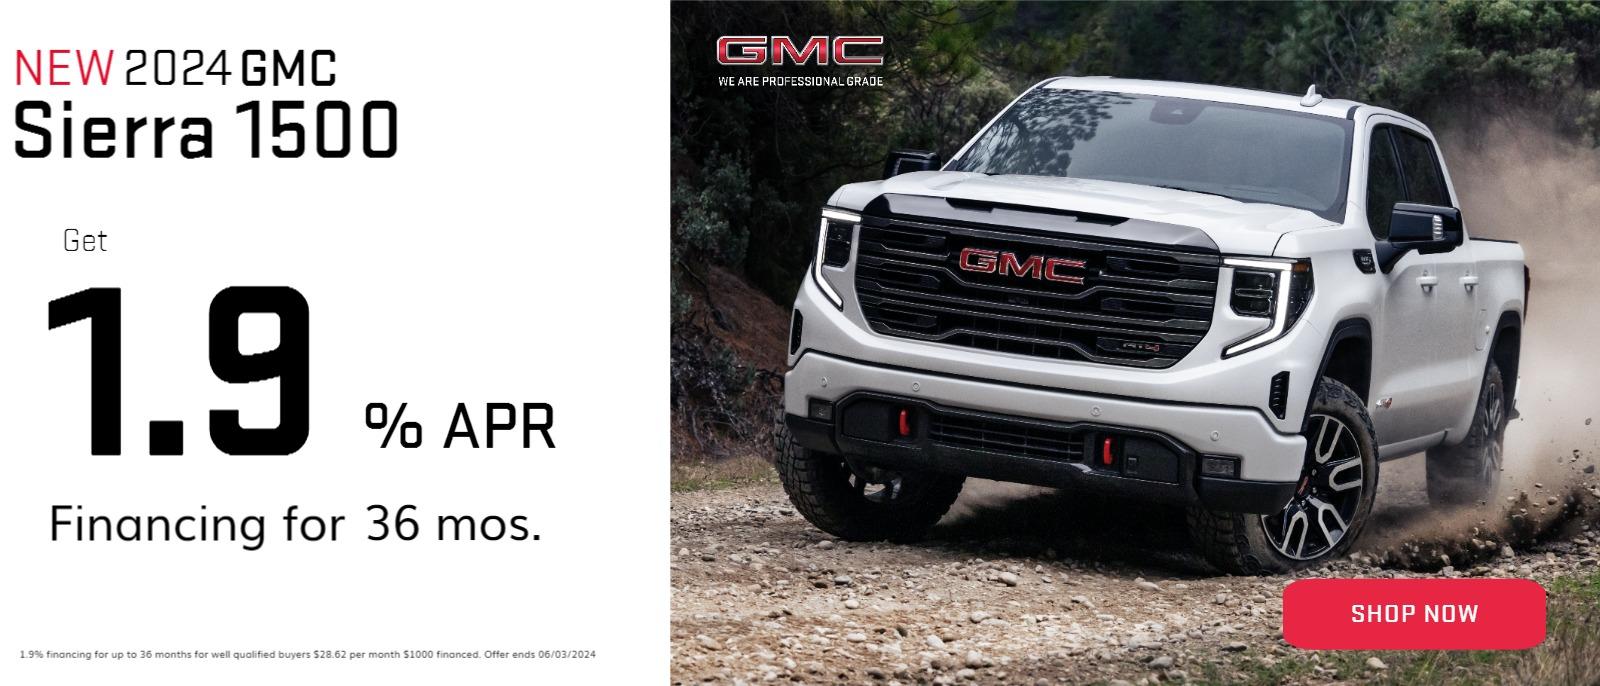 NEW 2024 GMC Sierra 1500 Get 1.9 % APR Financing for 36 mos. 1.9% financing for up to 36 months for well qualified buyers $28.62 per month $1000 financed. Offer ends 06/03/2024